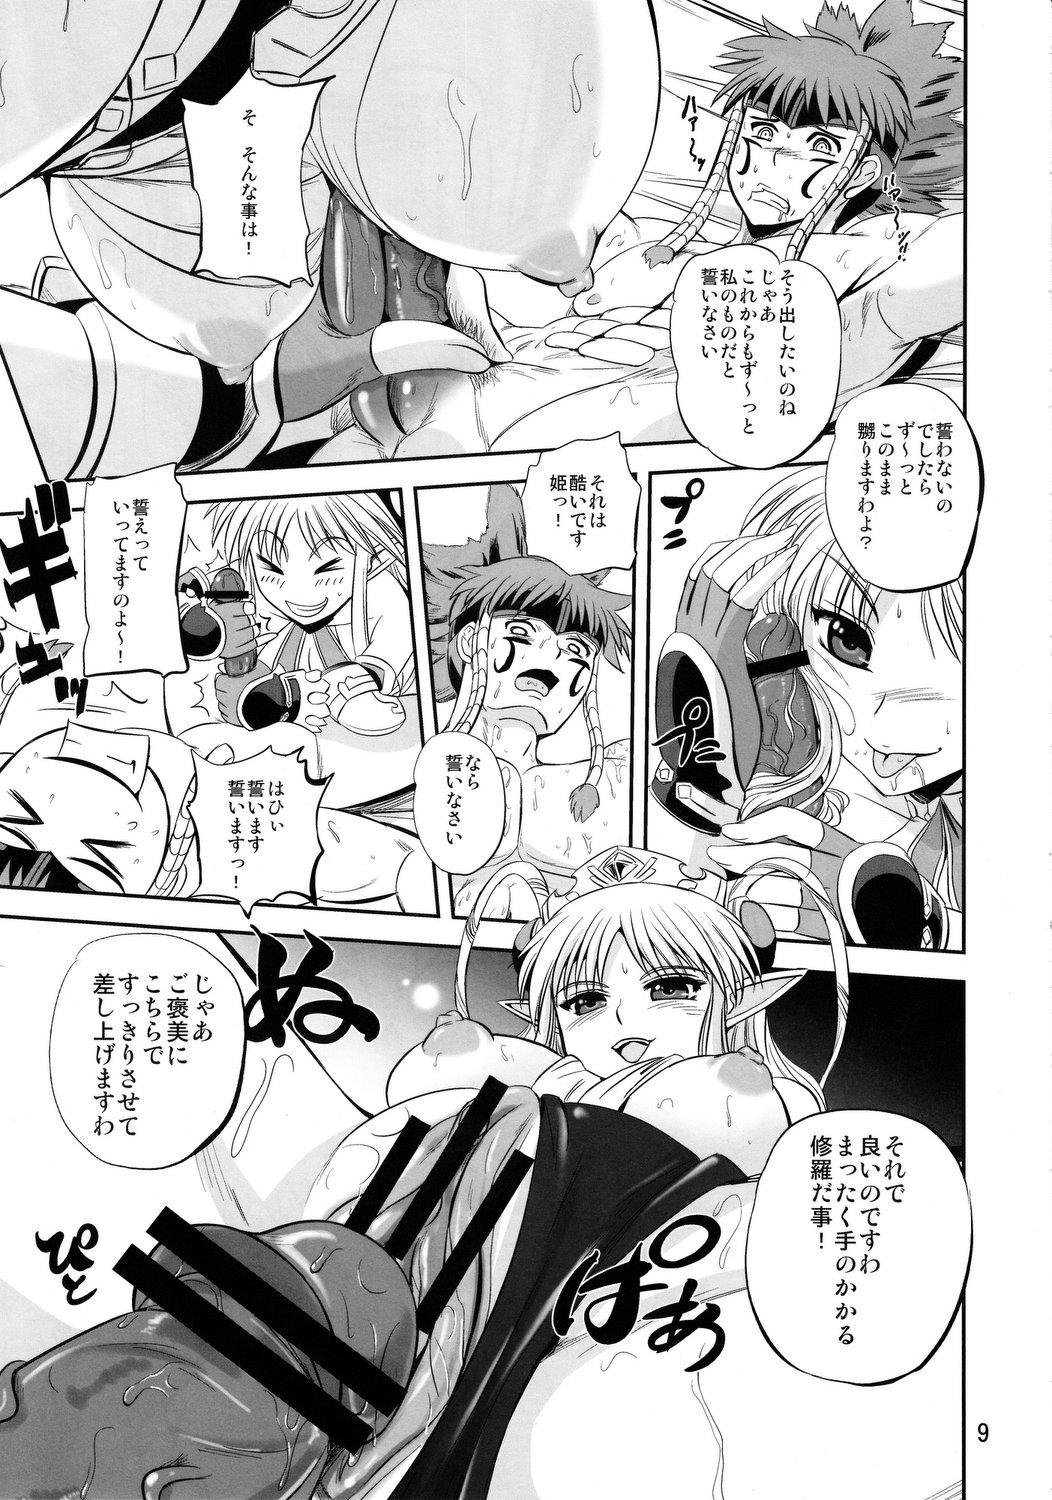 Gaysex Royal DoS Breaker - Super robot wars Endless frontier Shecock - Page 8